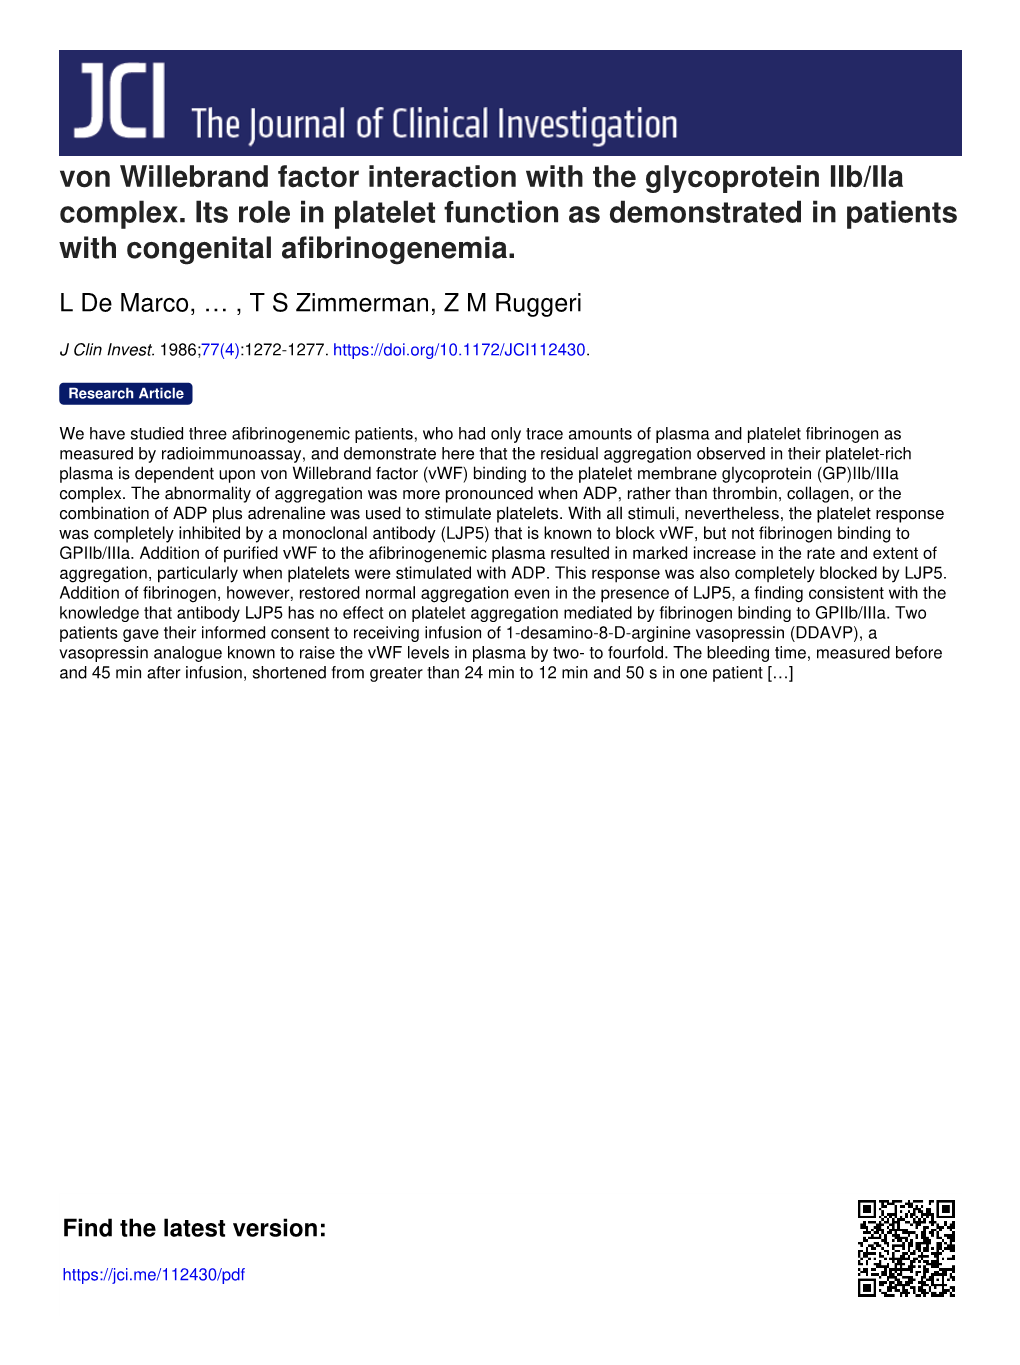 Von Willebrand Factor Interaction with the Glycoprotein Iib/Iia Complex. Its Role in Platelet Function As Demonstrated in Patients with Congenital Afibrinogenemia